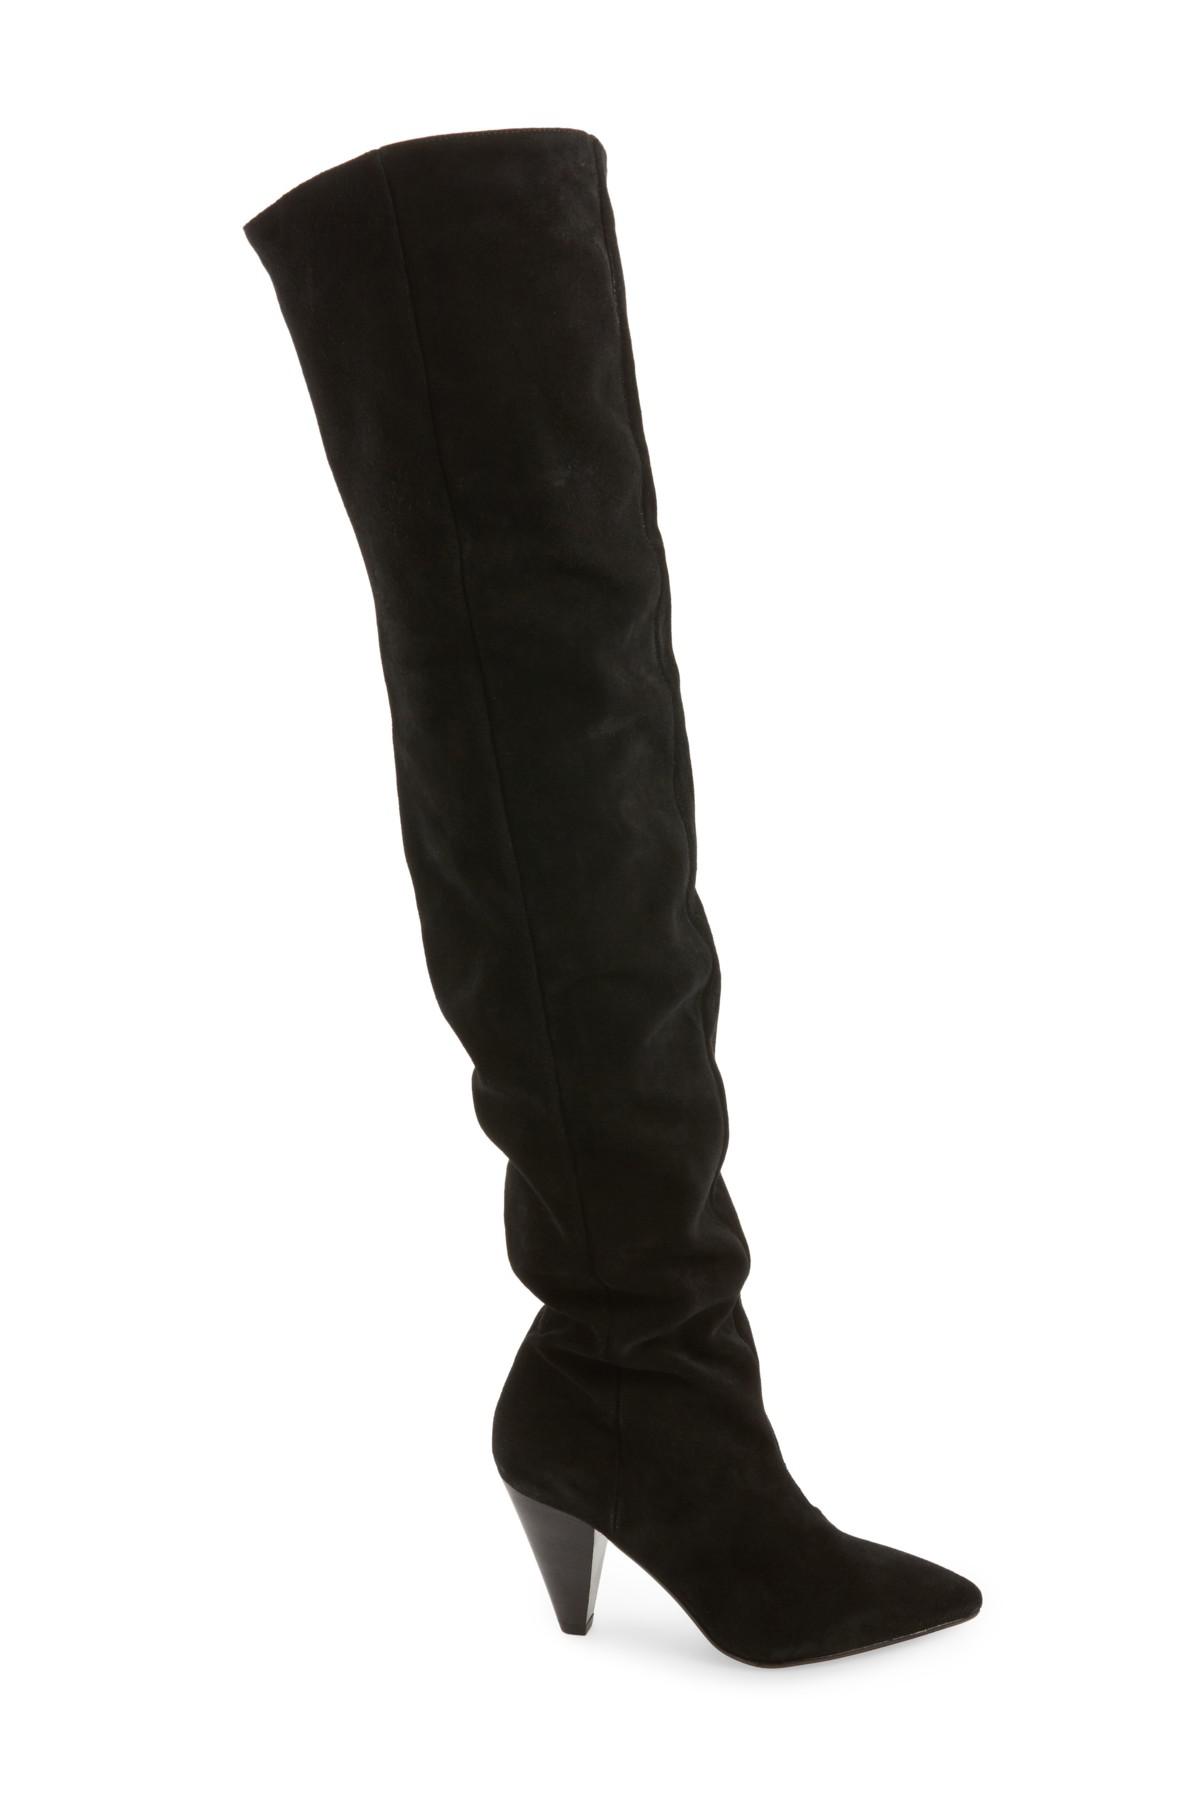 topshop thigh boots